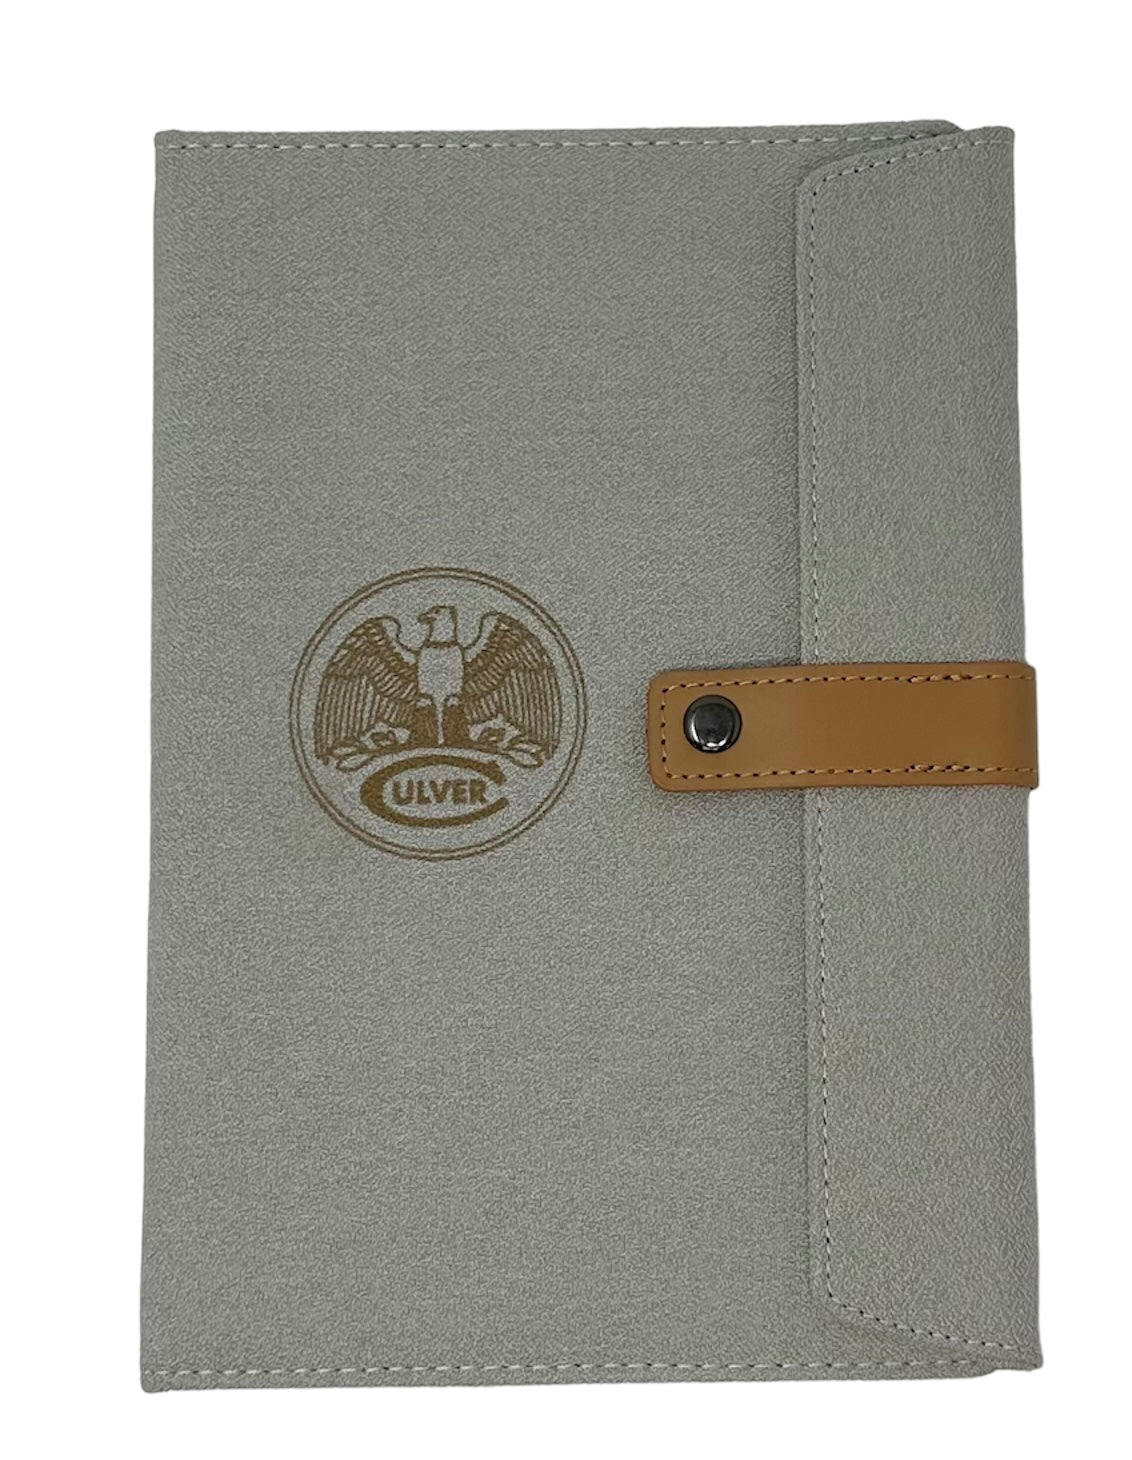 Culver Academies Two-Tone Journal with Leather Closure - Gray